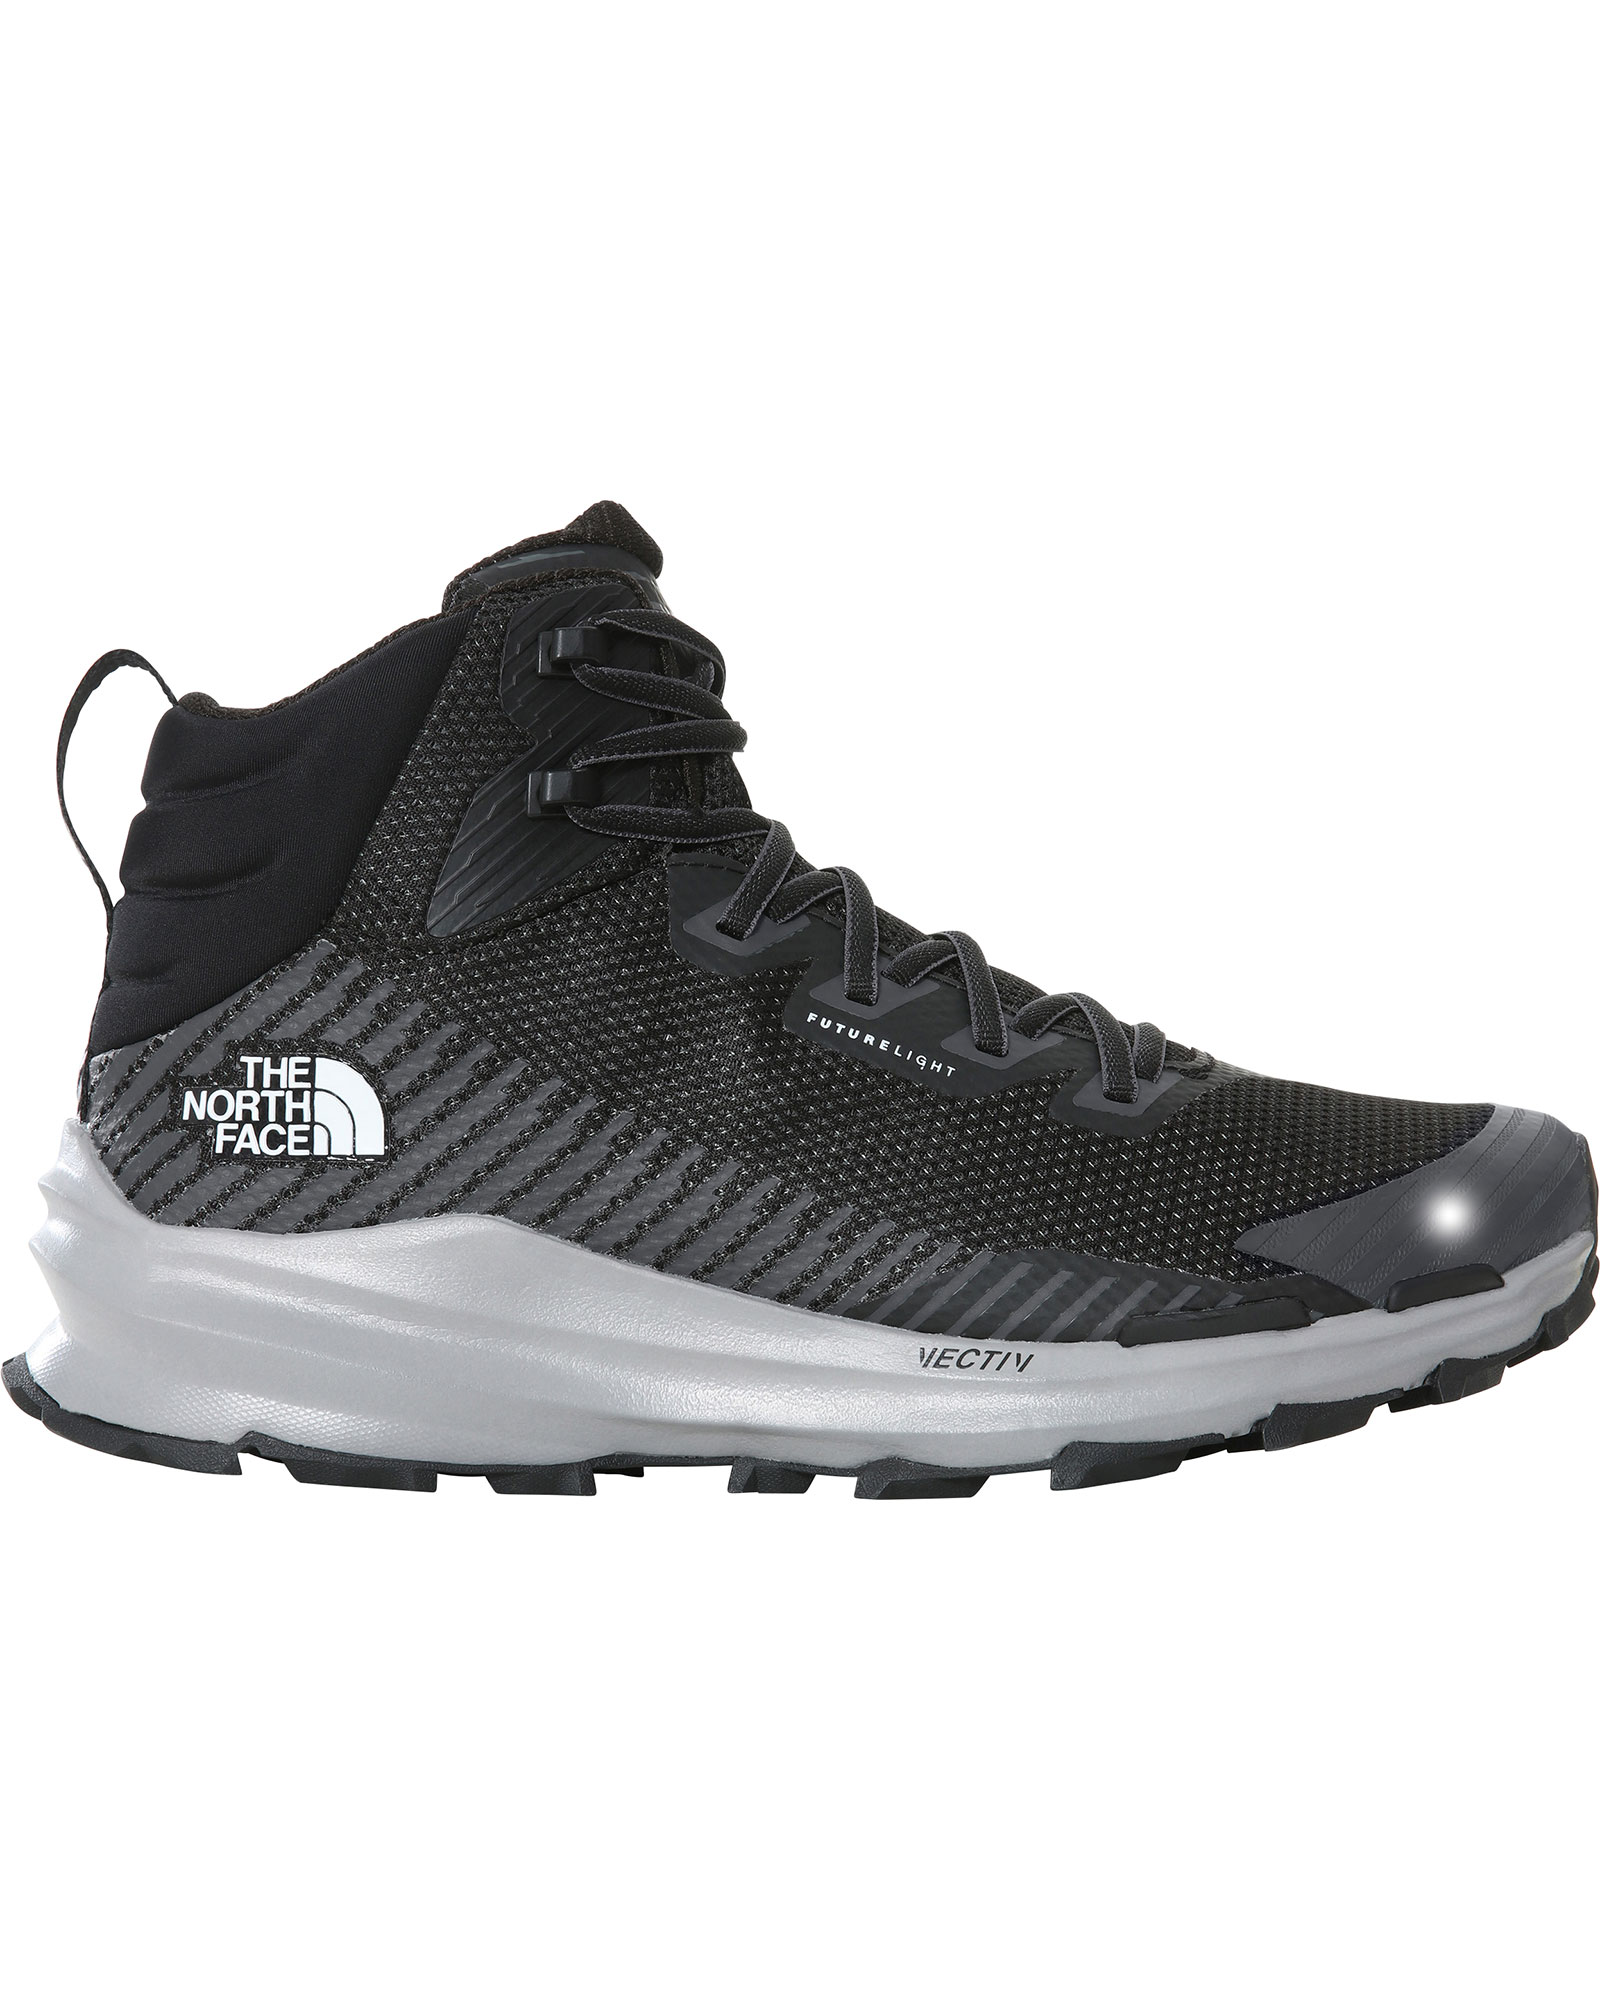 The North Face Vectiv Fastpack Mid Futurelight Mens Boots